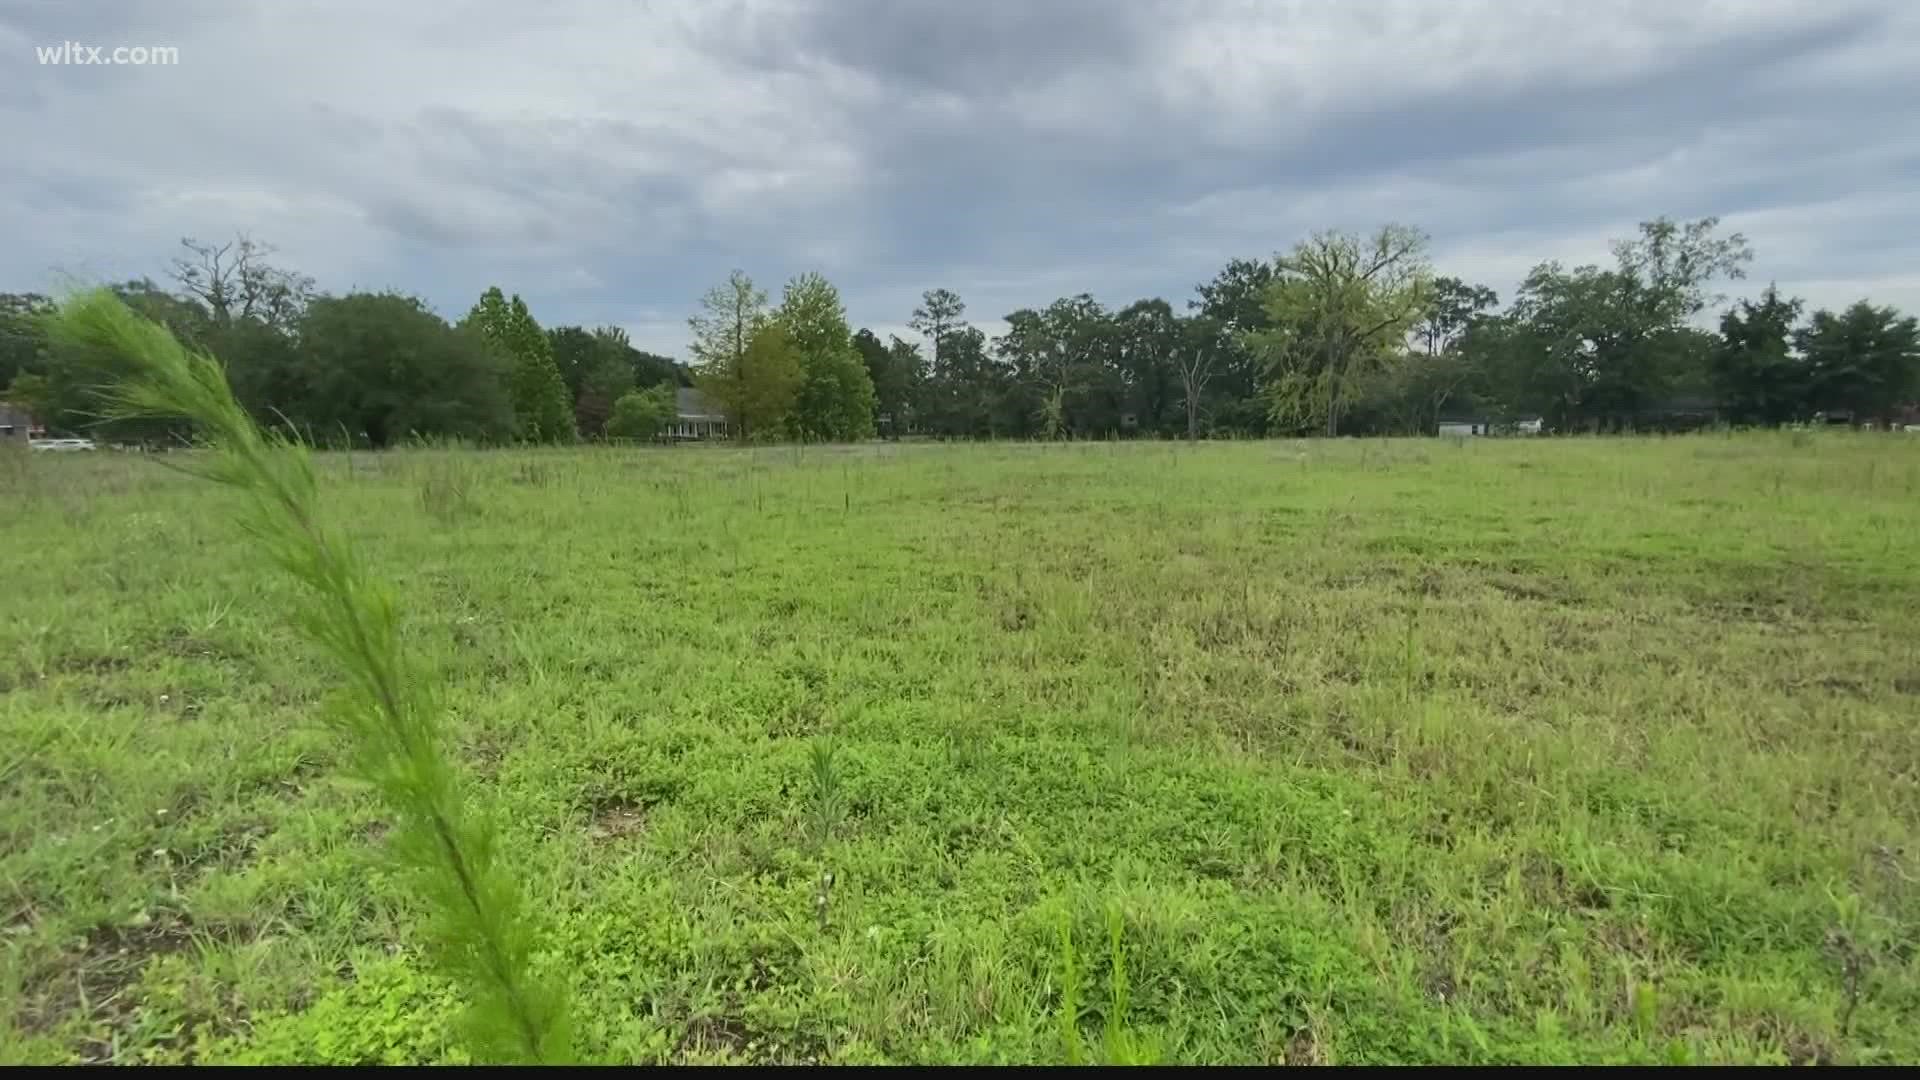 The city is asking developers to submit proposals on how to redevelop the property.